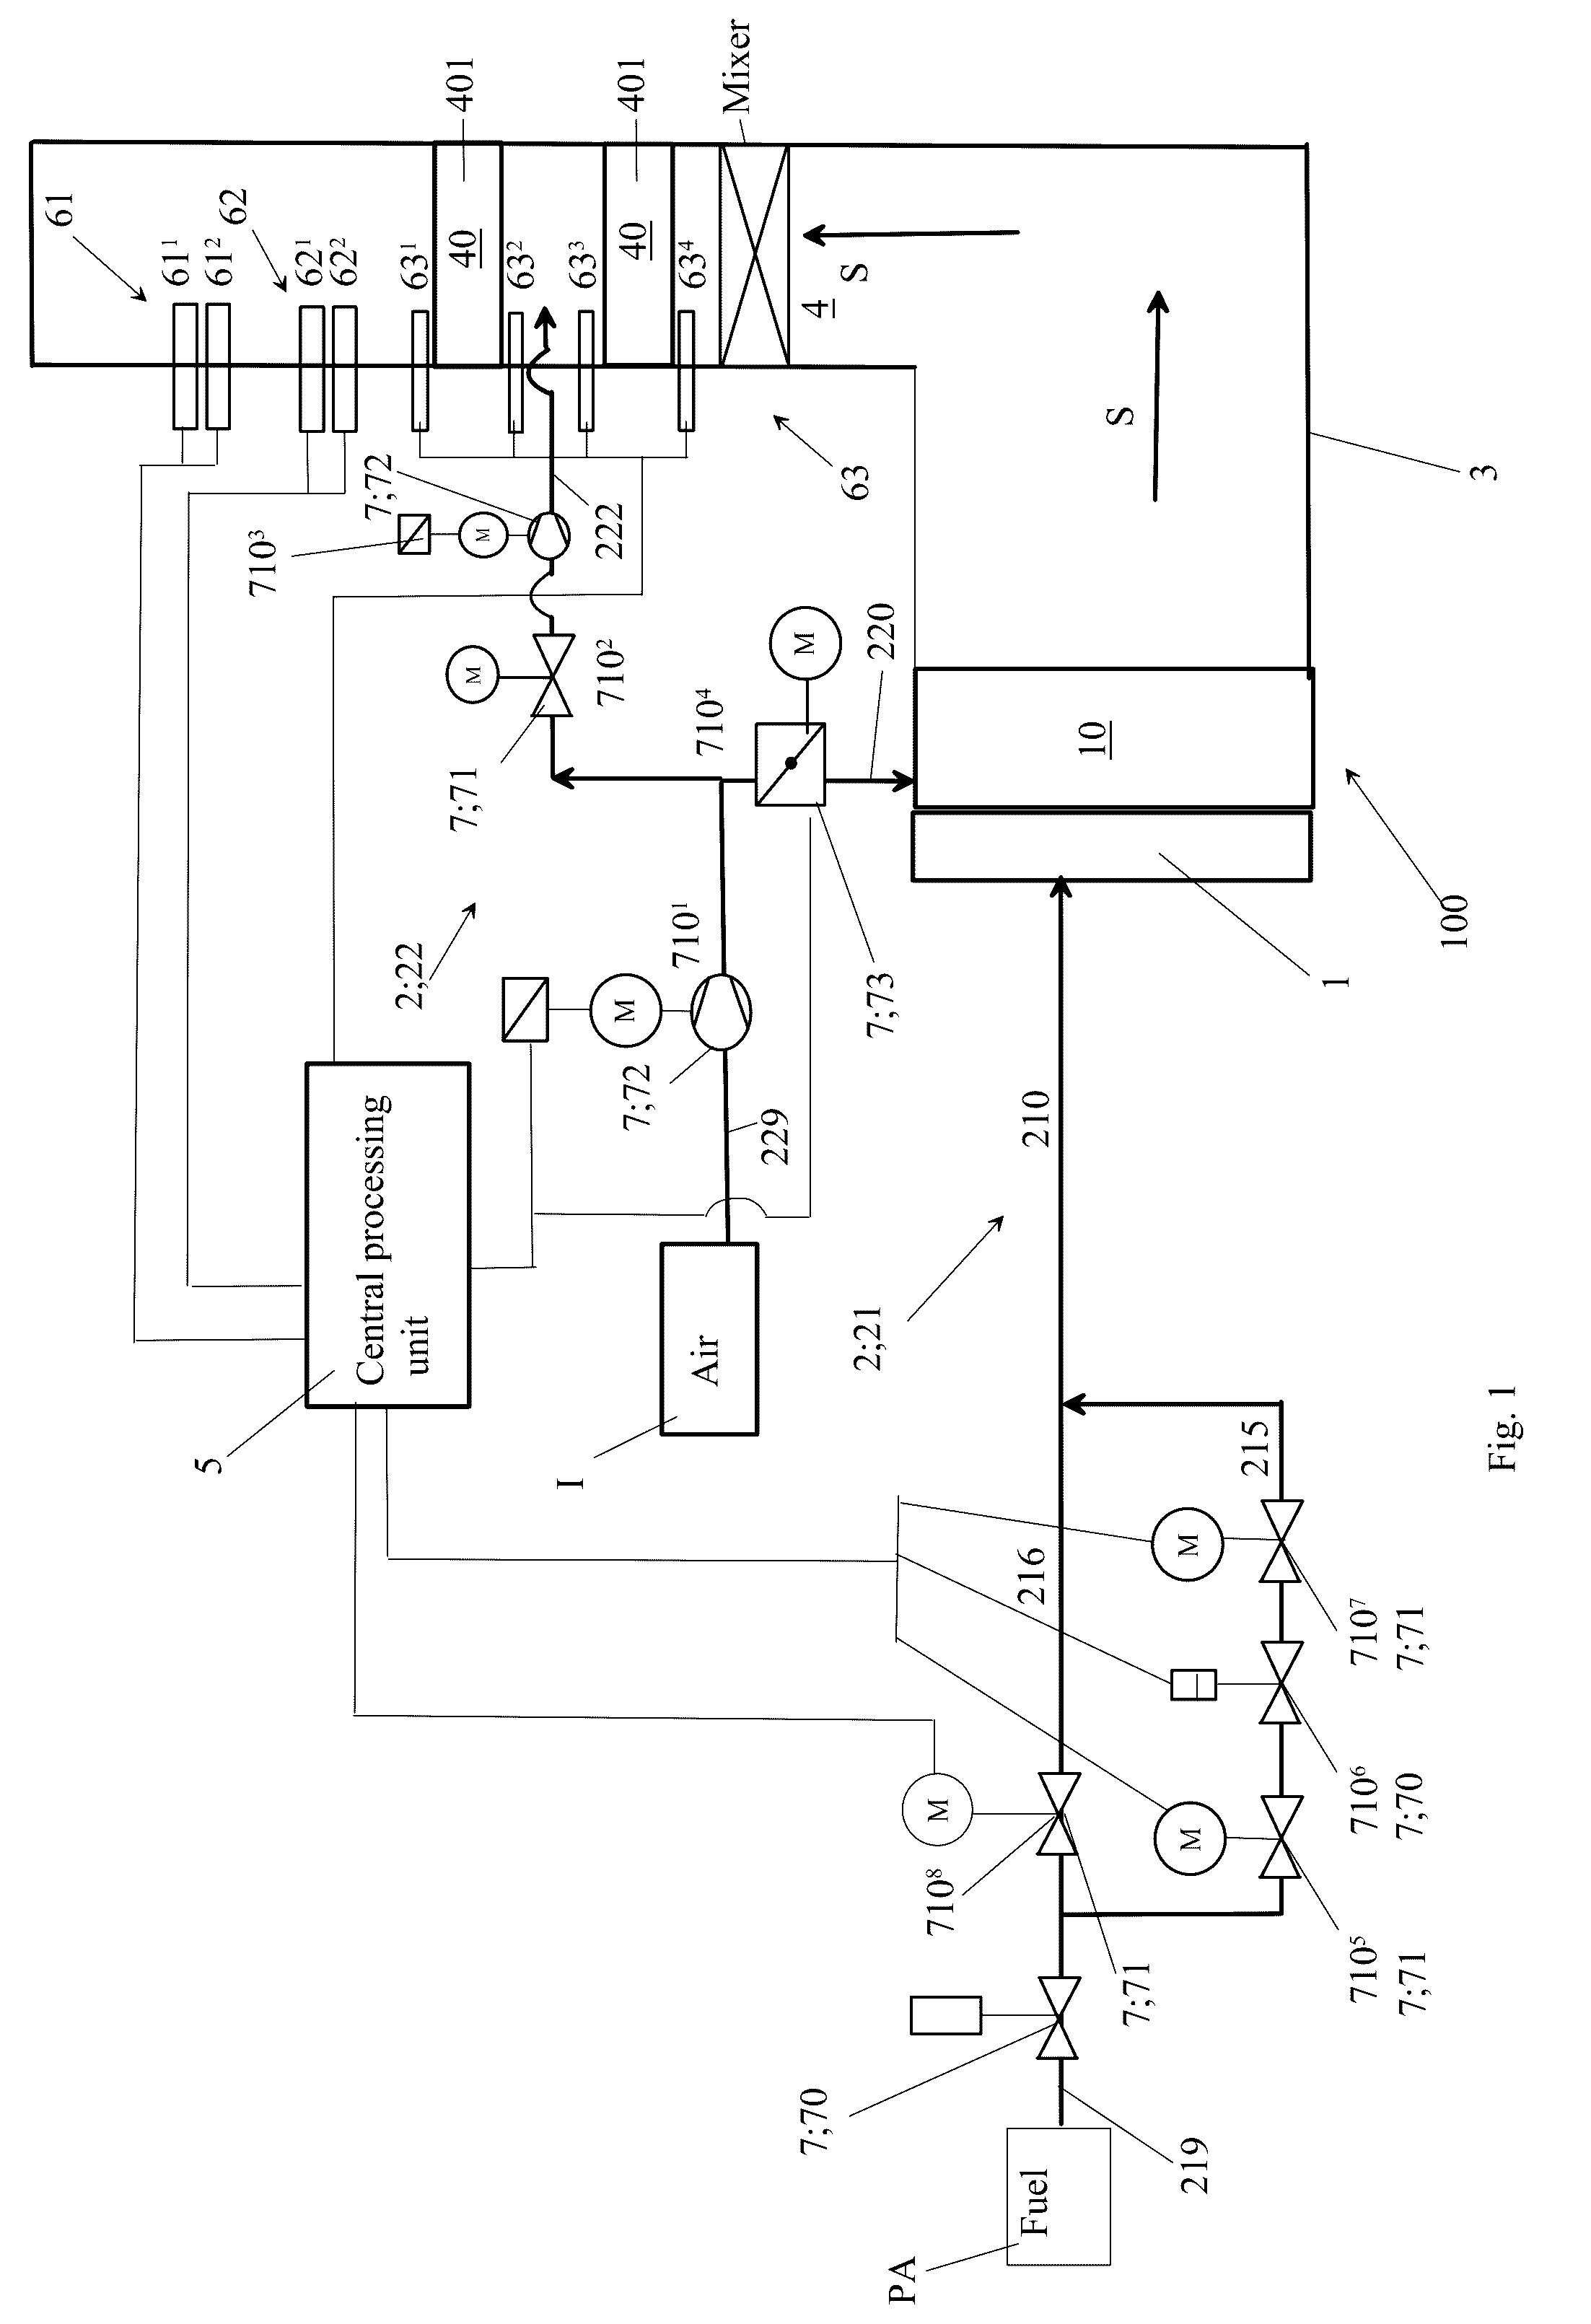 Arrangement and burner automation for adjusting the ratio between supplied amounts of fuel and air in an industrial burner